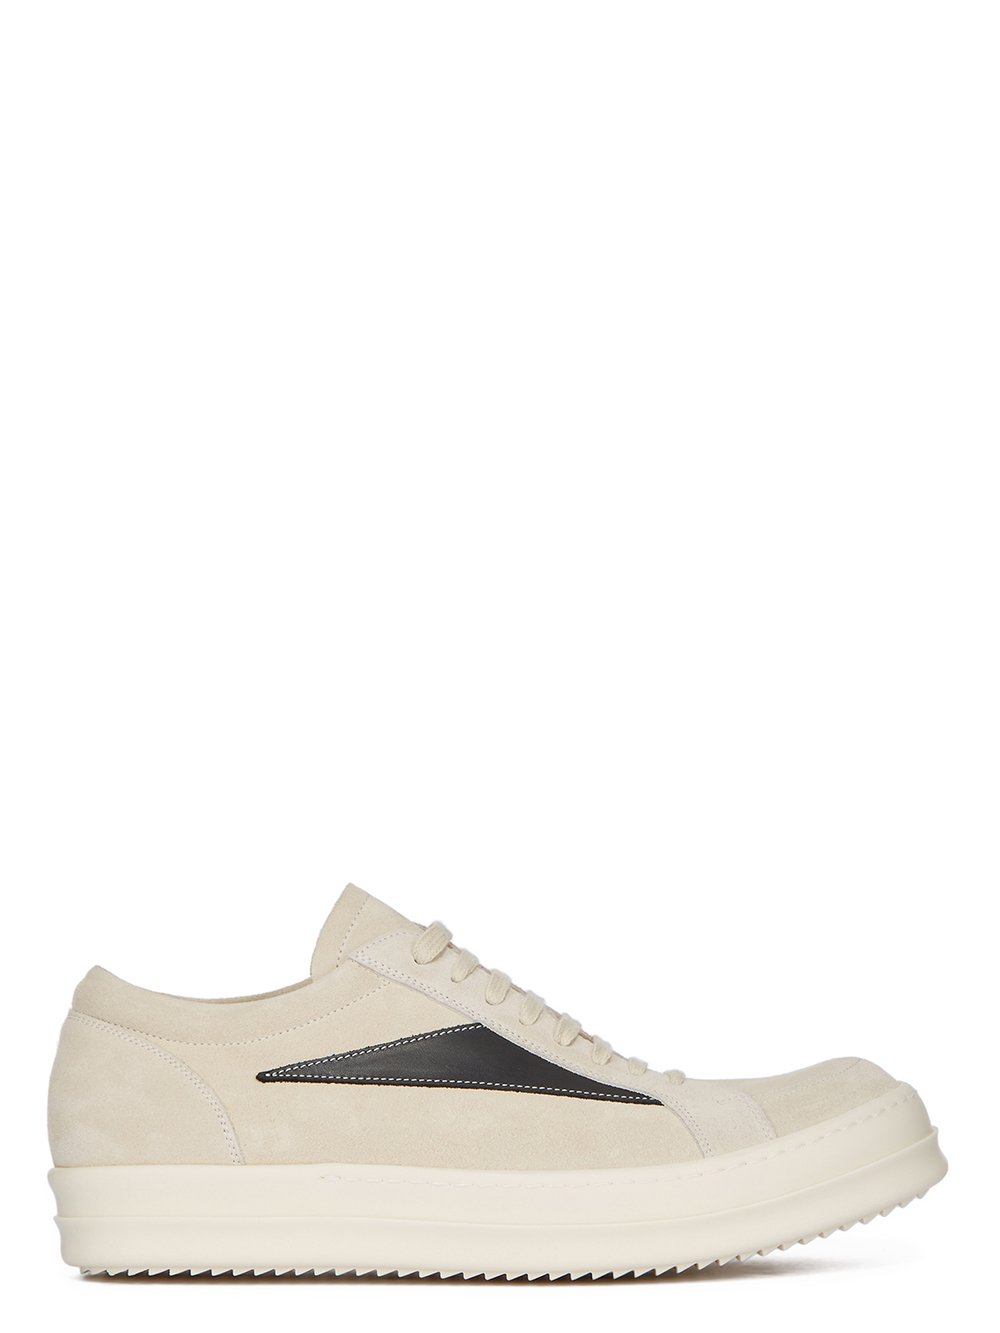 RICK OWENS FW23 LUXOR VINTAGE SNEAKS IN VELOUR SUEDE AND FULL GRAIN CALF LEATHER